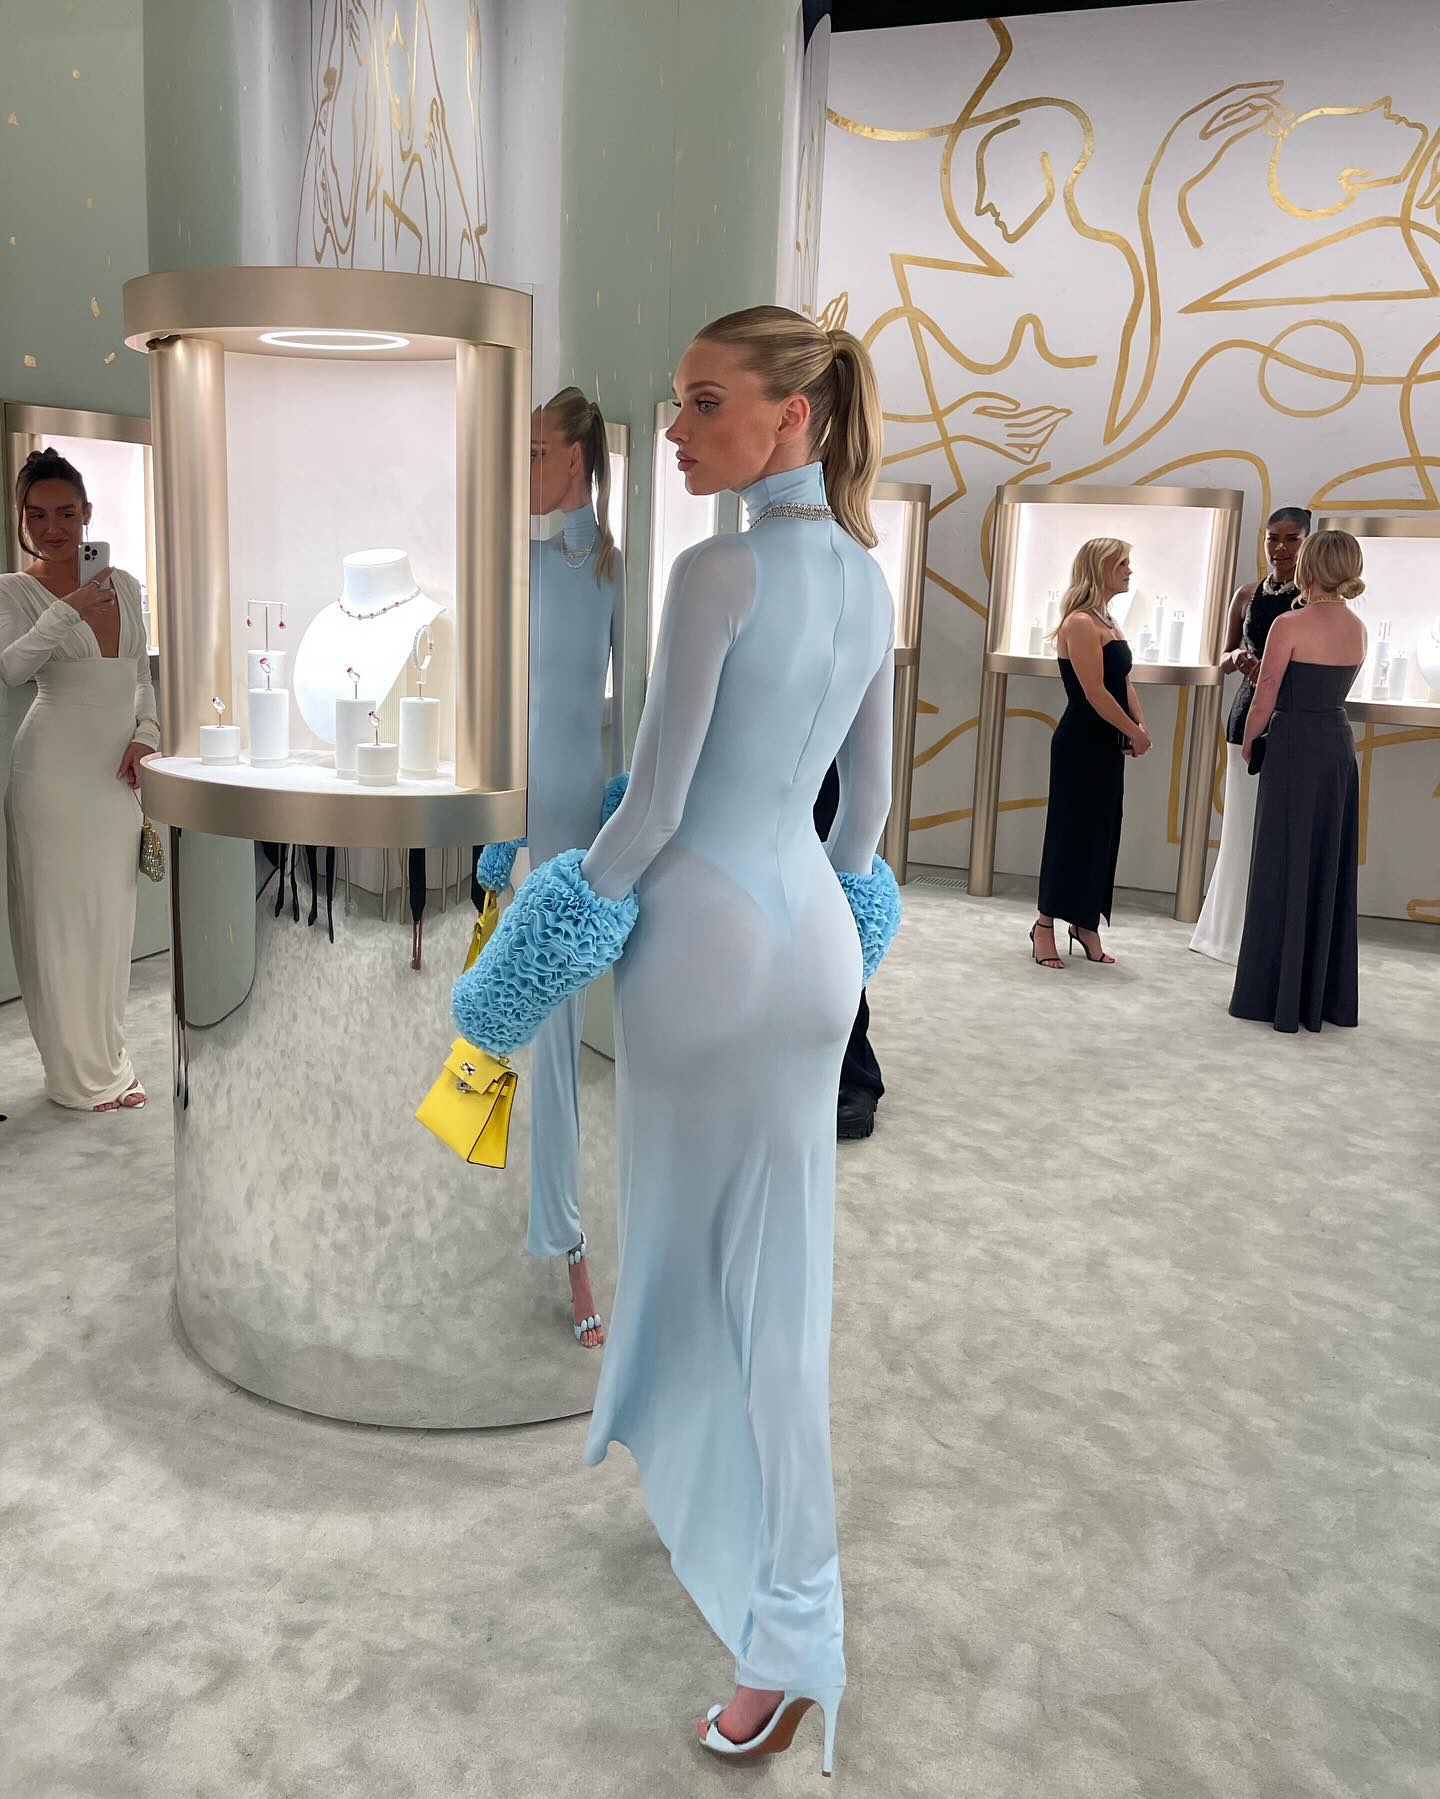 Elsa Hosk is photographed from behind wearing a light blue maxi dress with visible thong underwear